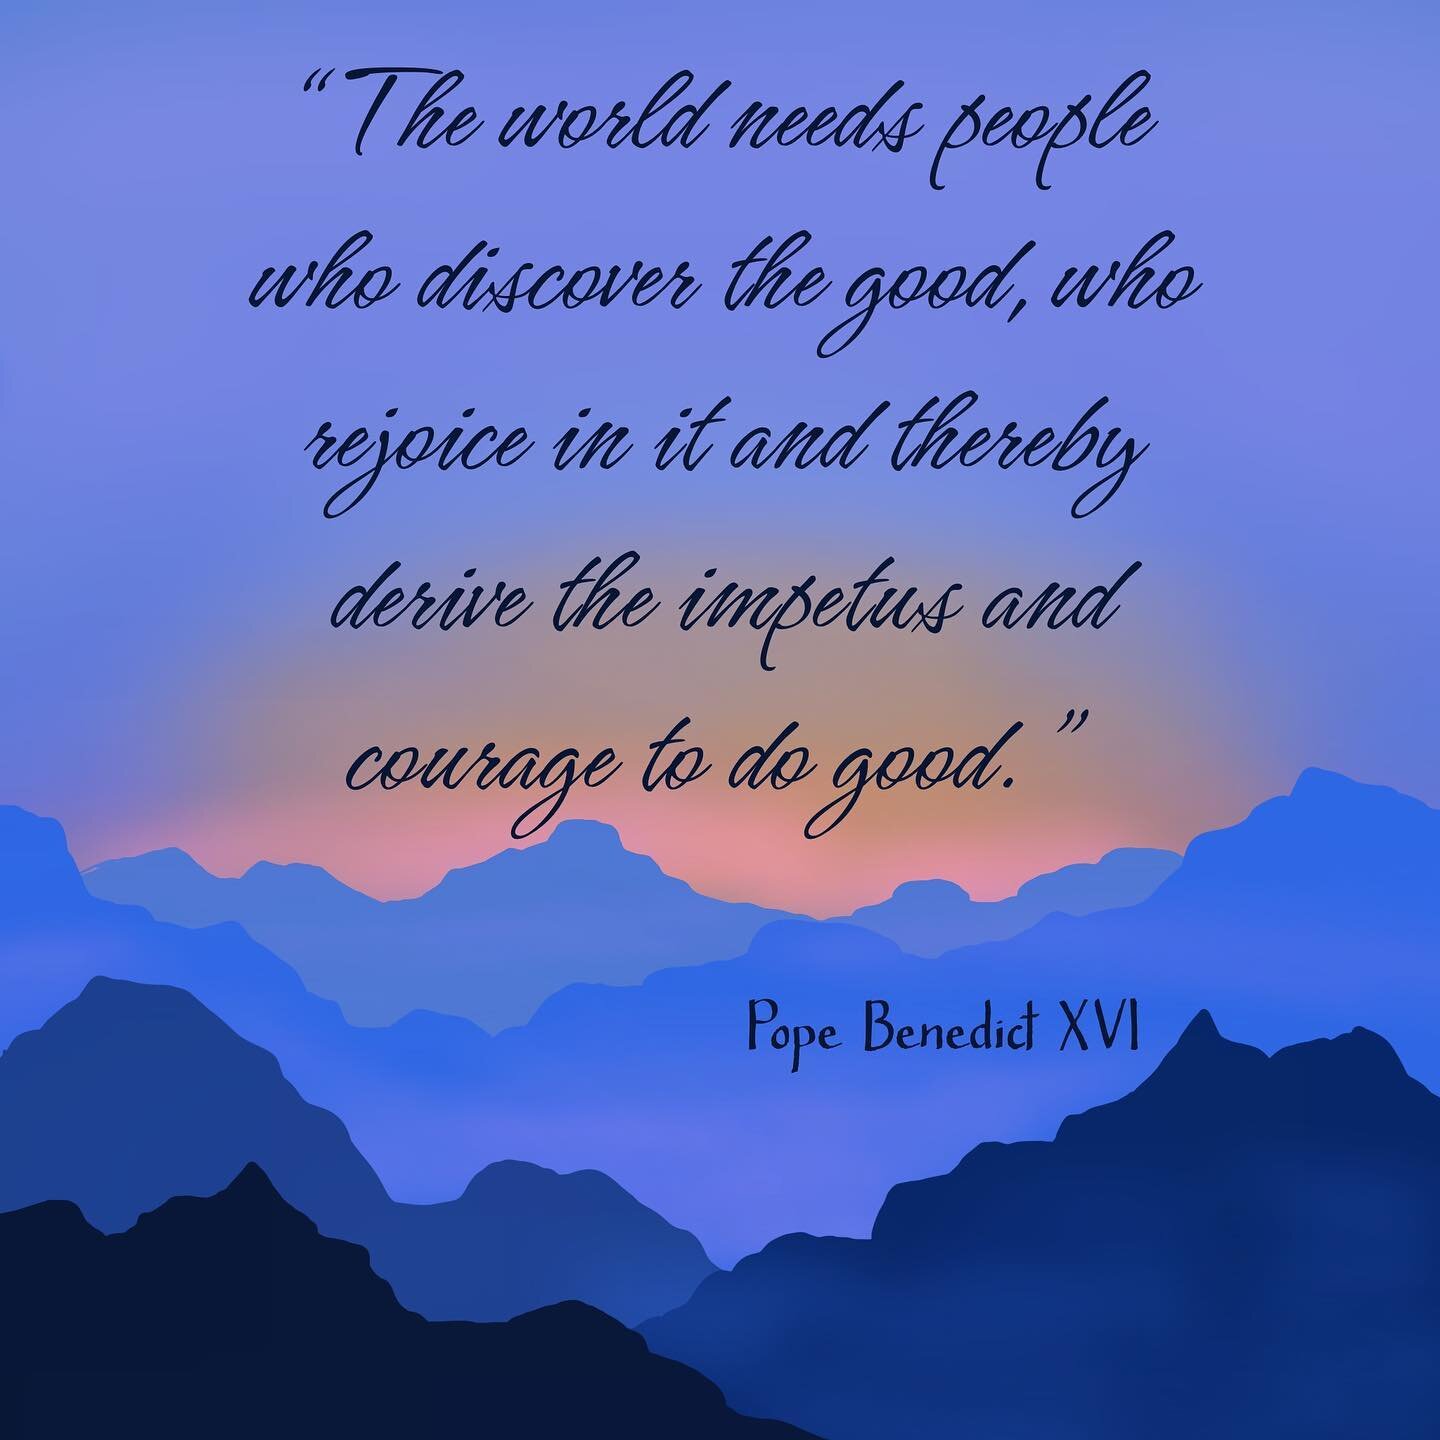 Thanks to all my friends who have the courage to do good. Nonprofit leaders, volunteers, and teams in our community are continuing to serve. Blessed are they!  May Pope Benedict XVI be comfortable and have courage in his remaining years.